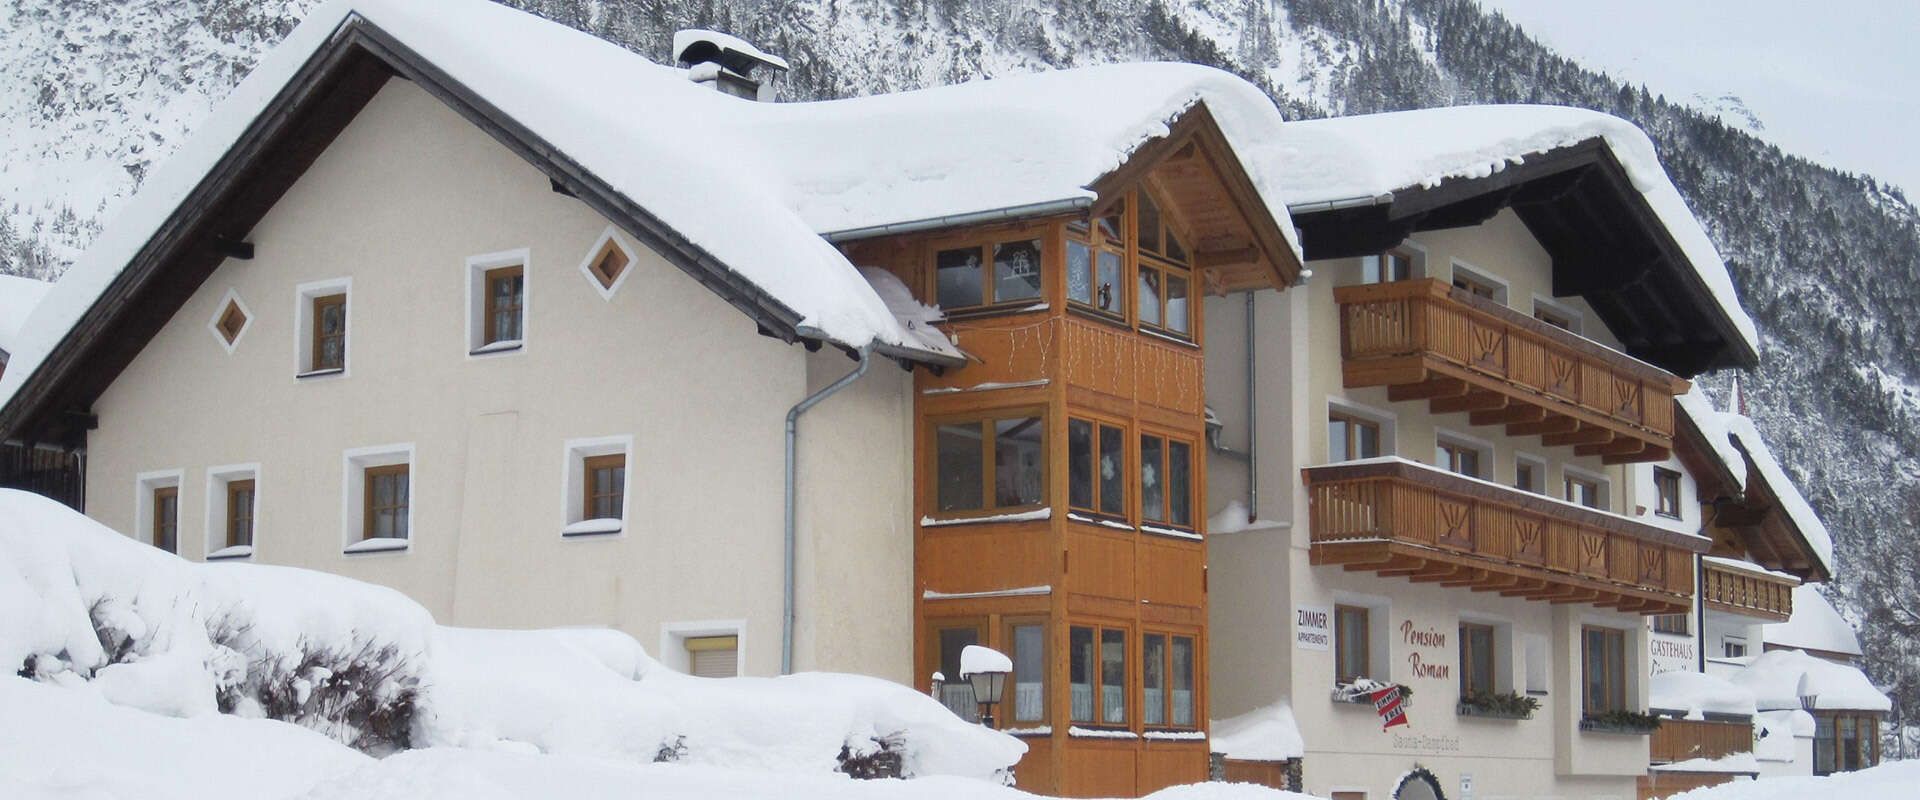 Winter holidays in the Pension Roman am Arlberg in Tyrol